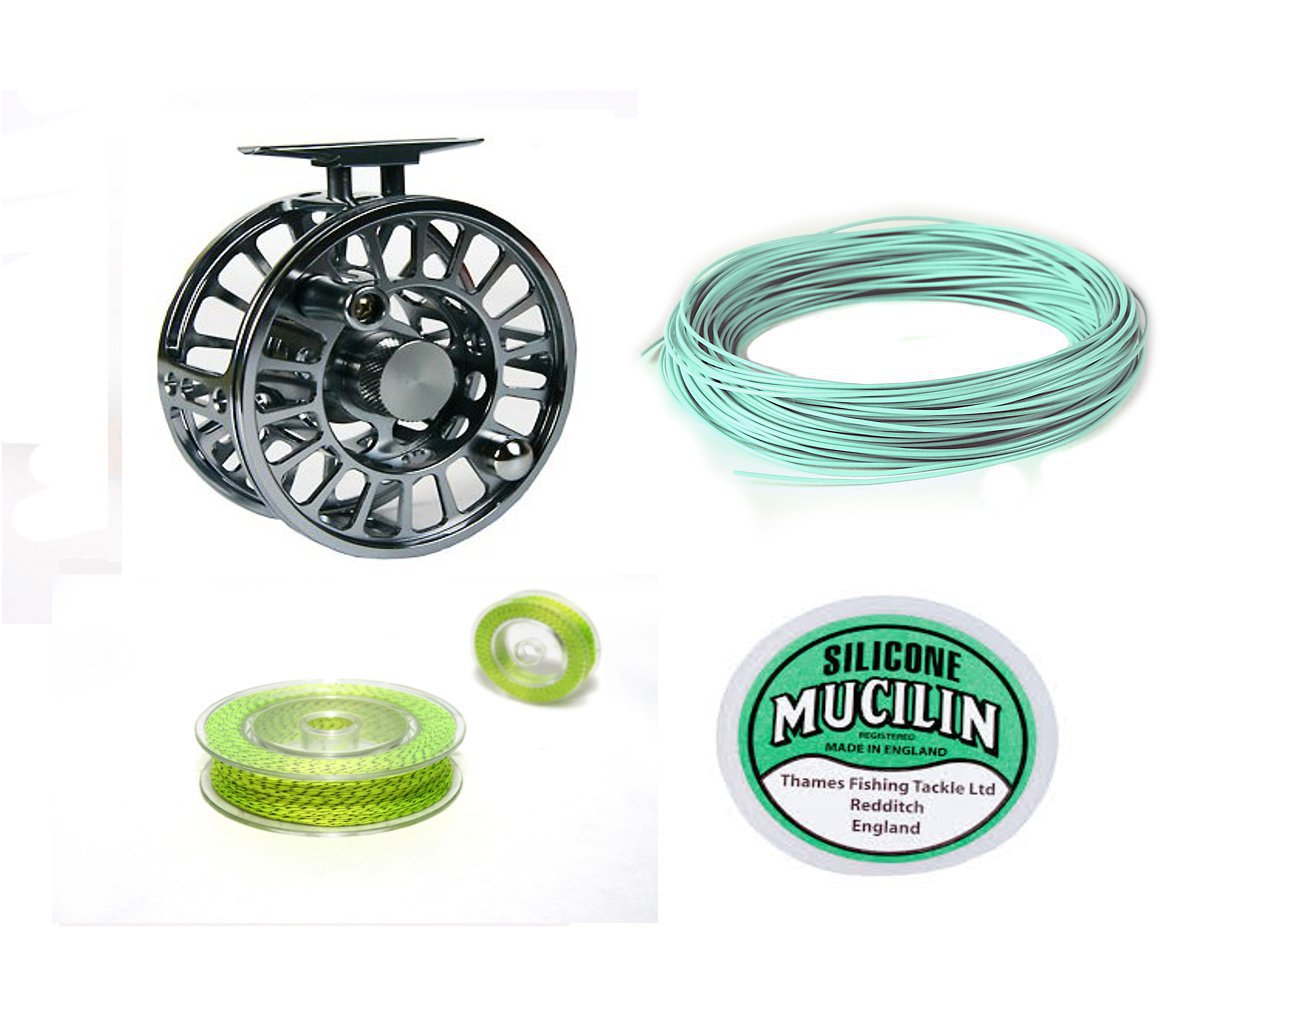 Fly reel “Salmon #10/12” with backing and running line – Scandinavian Fly  lines